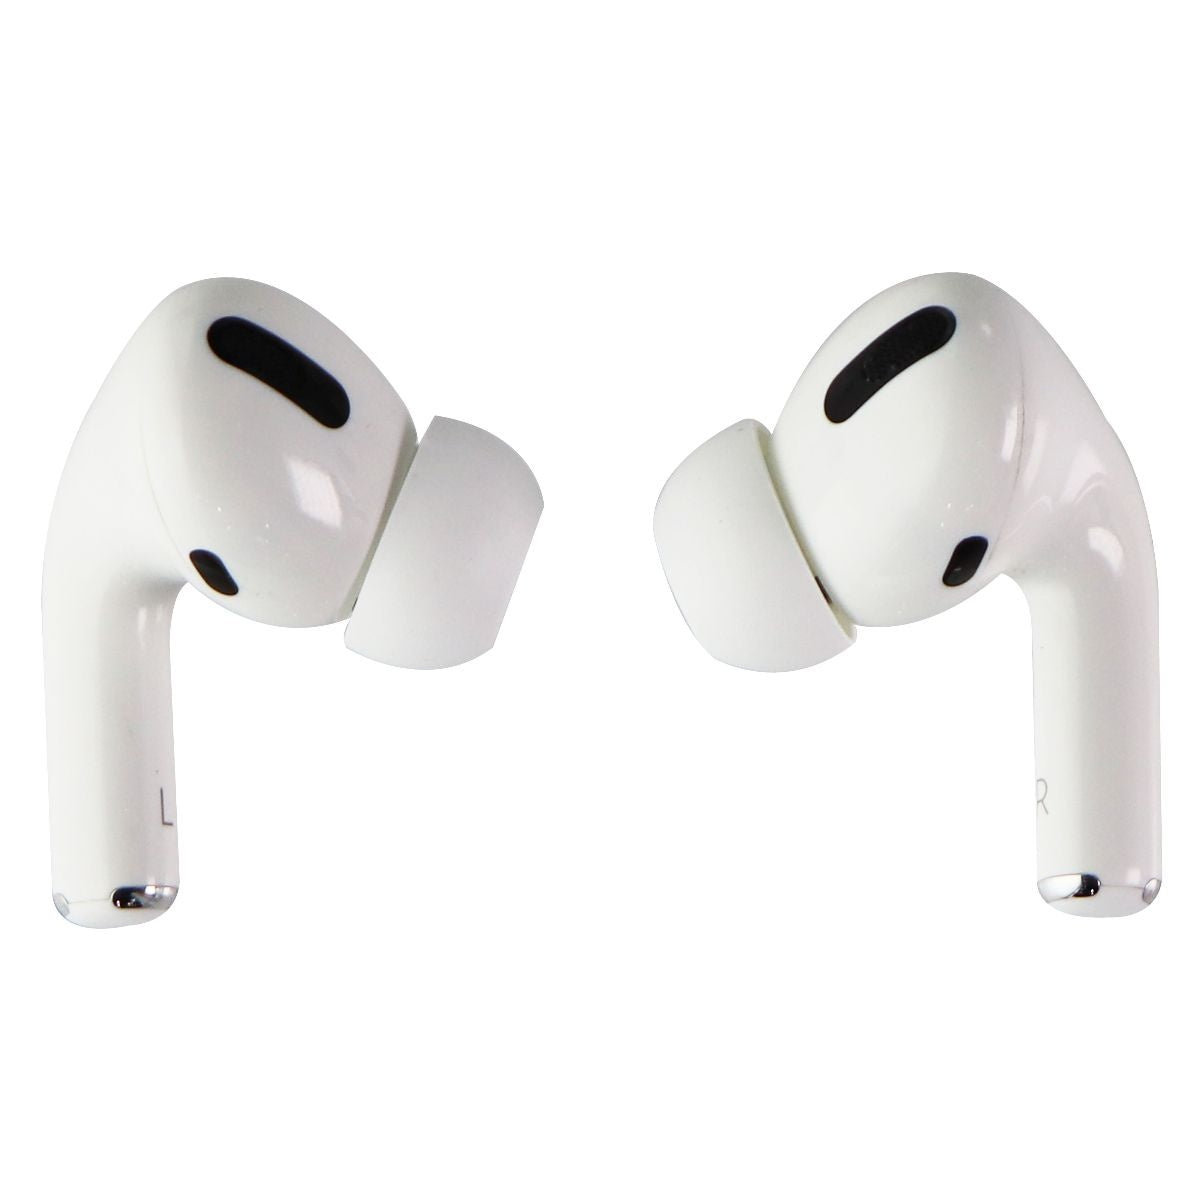 Apple AirPods Pro with Charging Case - White (MWP22AM/A)